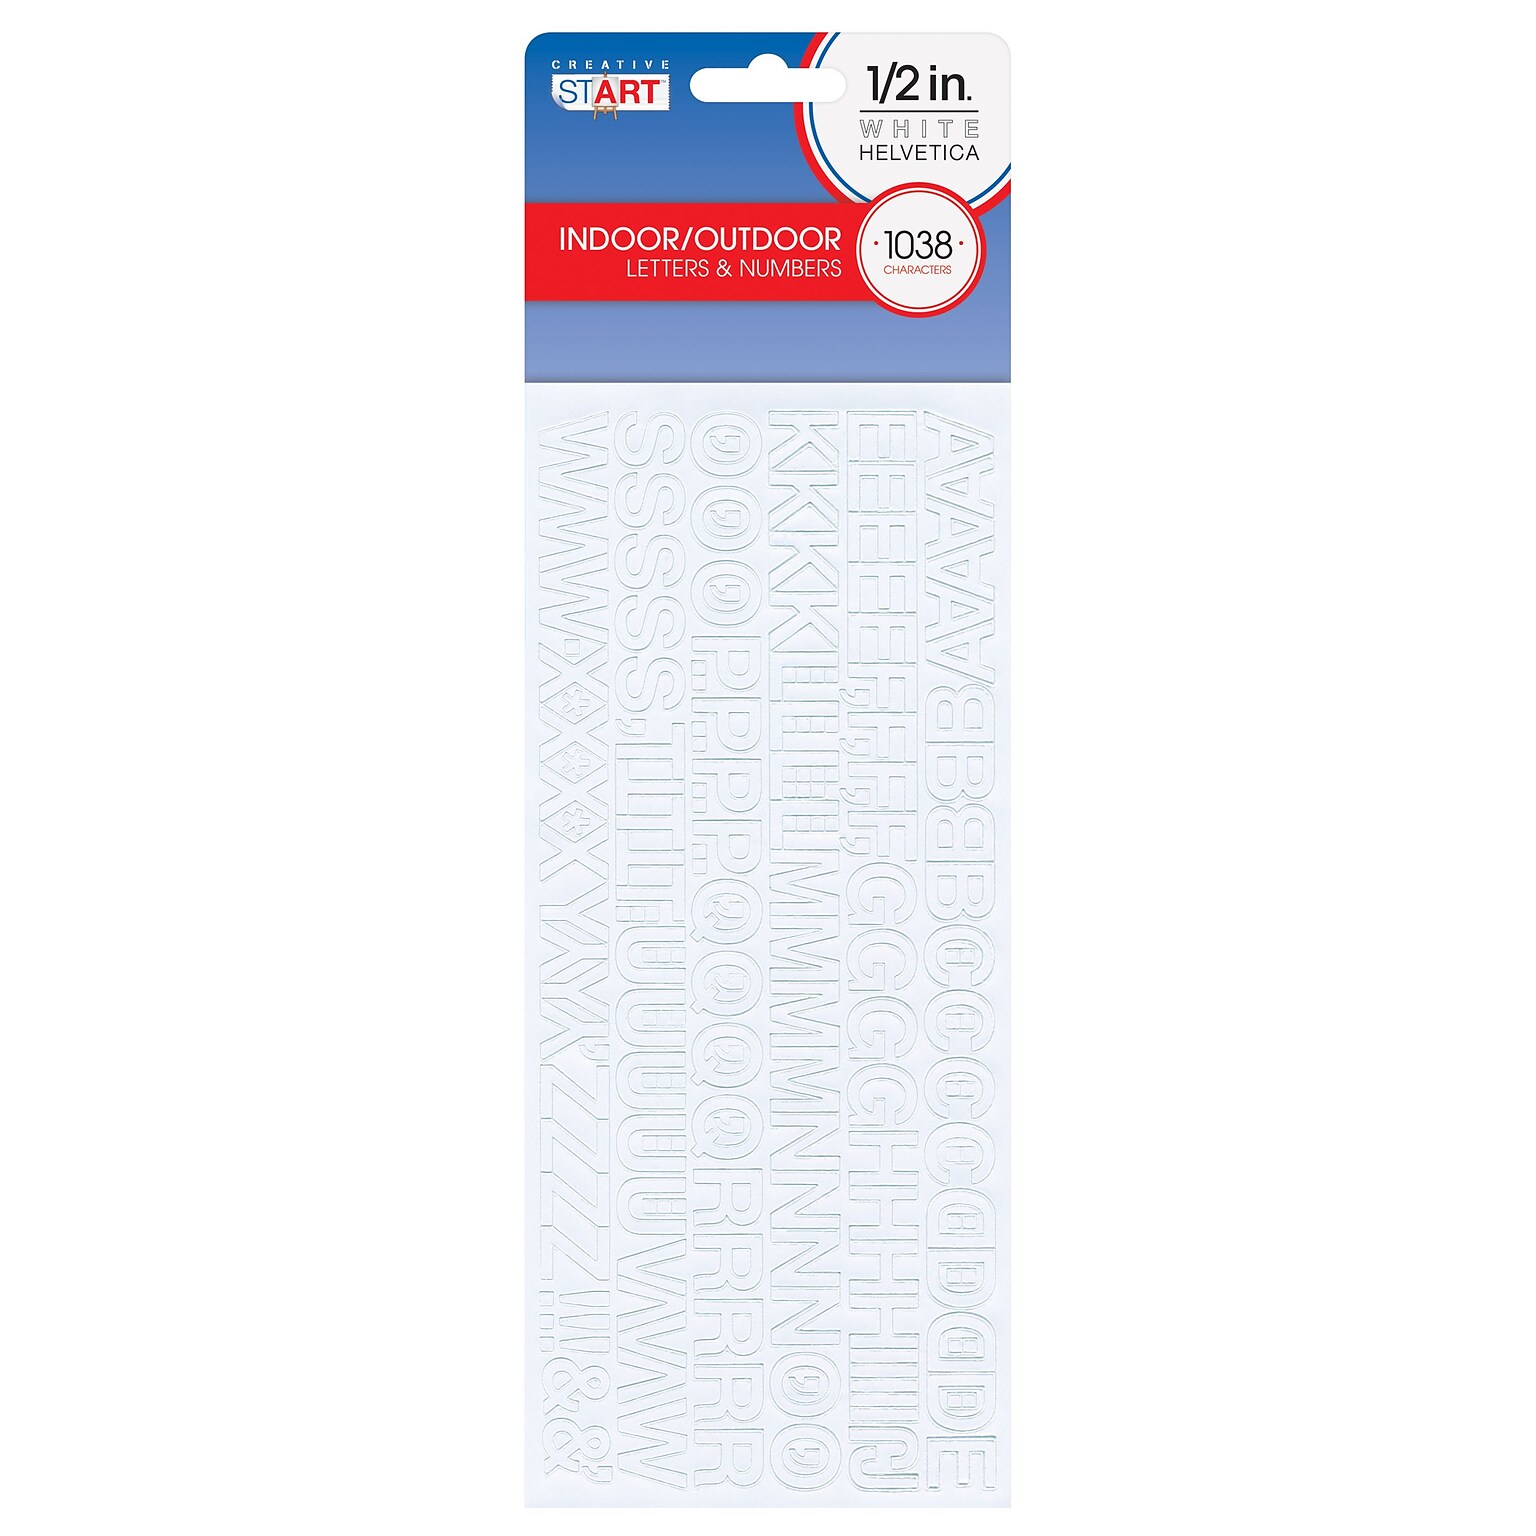 Creative Start Self-Adhesive 1/2H Letters, Numbers, and Characters, White, 4152 Count, 4 Pack (098197PK4)